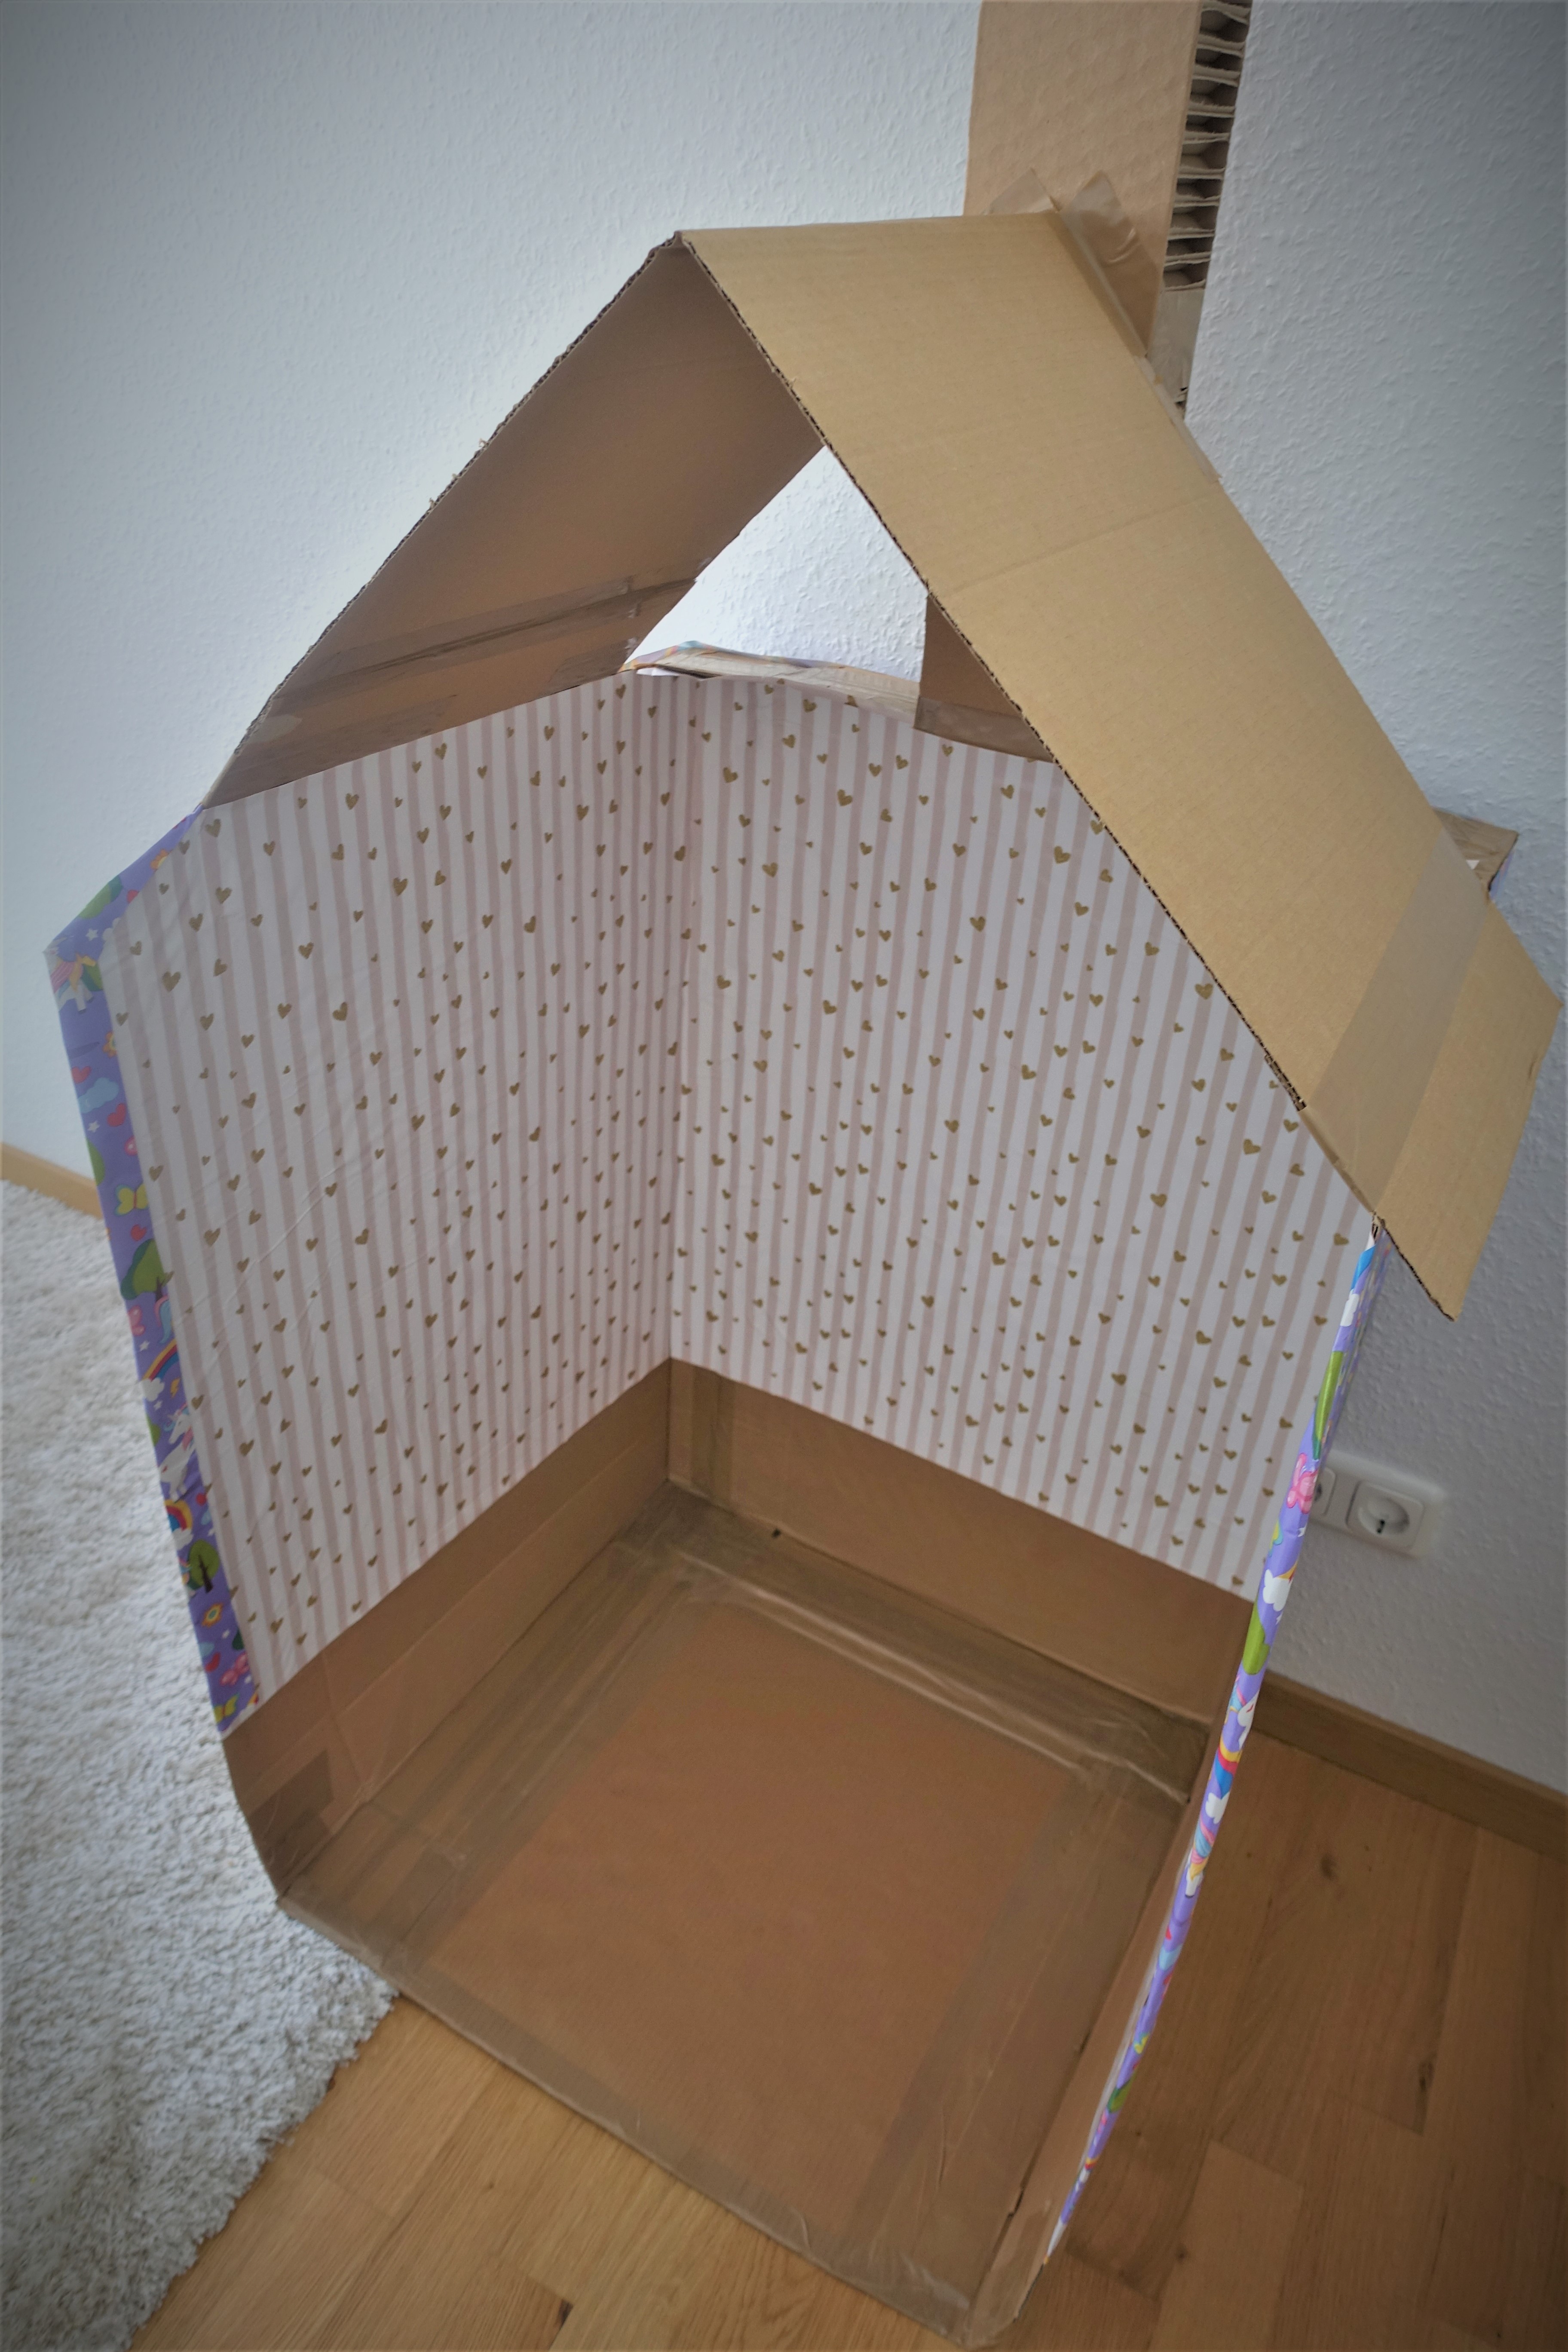 Stacked cardboard to form a small house with a roof and a chimney